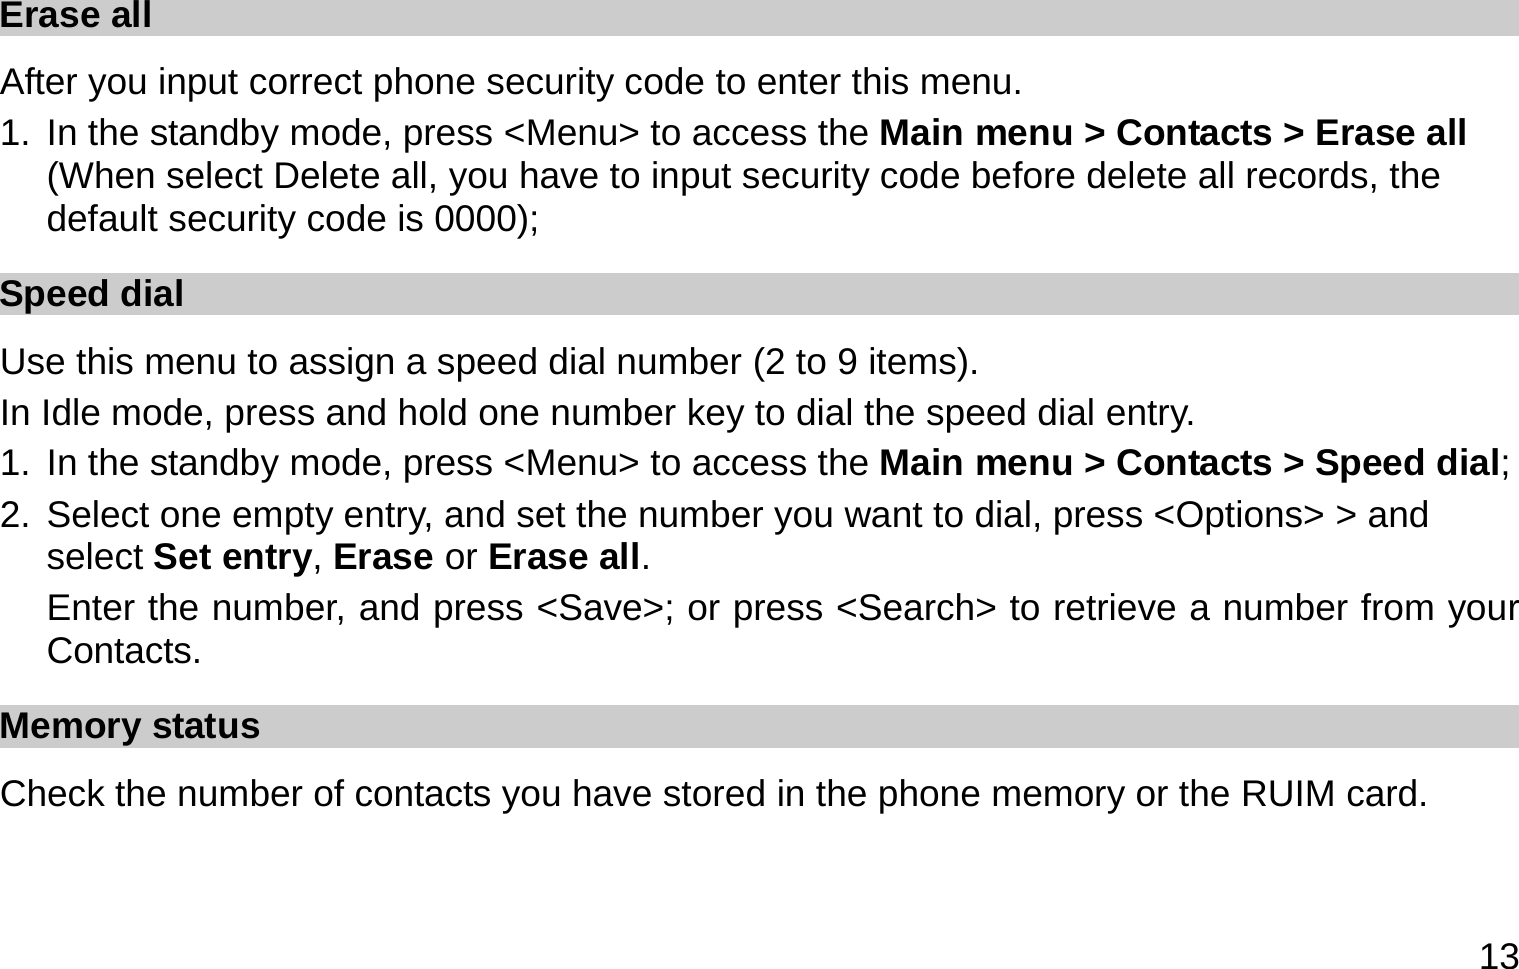  13 Erase all   After you input correct phone security code to enter this menu. 1. In the standby mode, press &lt;Menu&gt; to access the Main menu &gt; Contacts &gt; Erase all (When select Delete all, you have to input security code before delete all records, the default security code is 0000); Speed dial Use this menu to assign a speed dial number (2 to 9 items). In Idle mode, press and hold one number key to dial the speed dial entry. 1. In the standby mode, press &lt;Menu&gt; to access the Main menu &gt; Contacts &gt; Speed dial; 2. Select one empty entry, and set the number you want to dial, press &lt;Options&gt; &gt; and select Set entry, Erase or Erase all.  Enter the number, and press &lt;Save&gt;; or press &lt;Search&gt; to retrieve a number from your Contacts. Memory status Check the number of contacts you have stored in the phone memory or the RUIM card. 